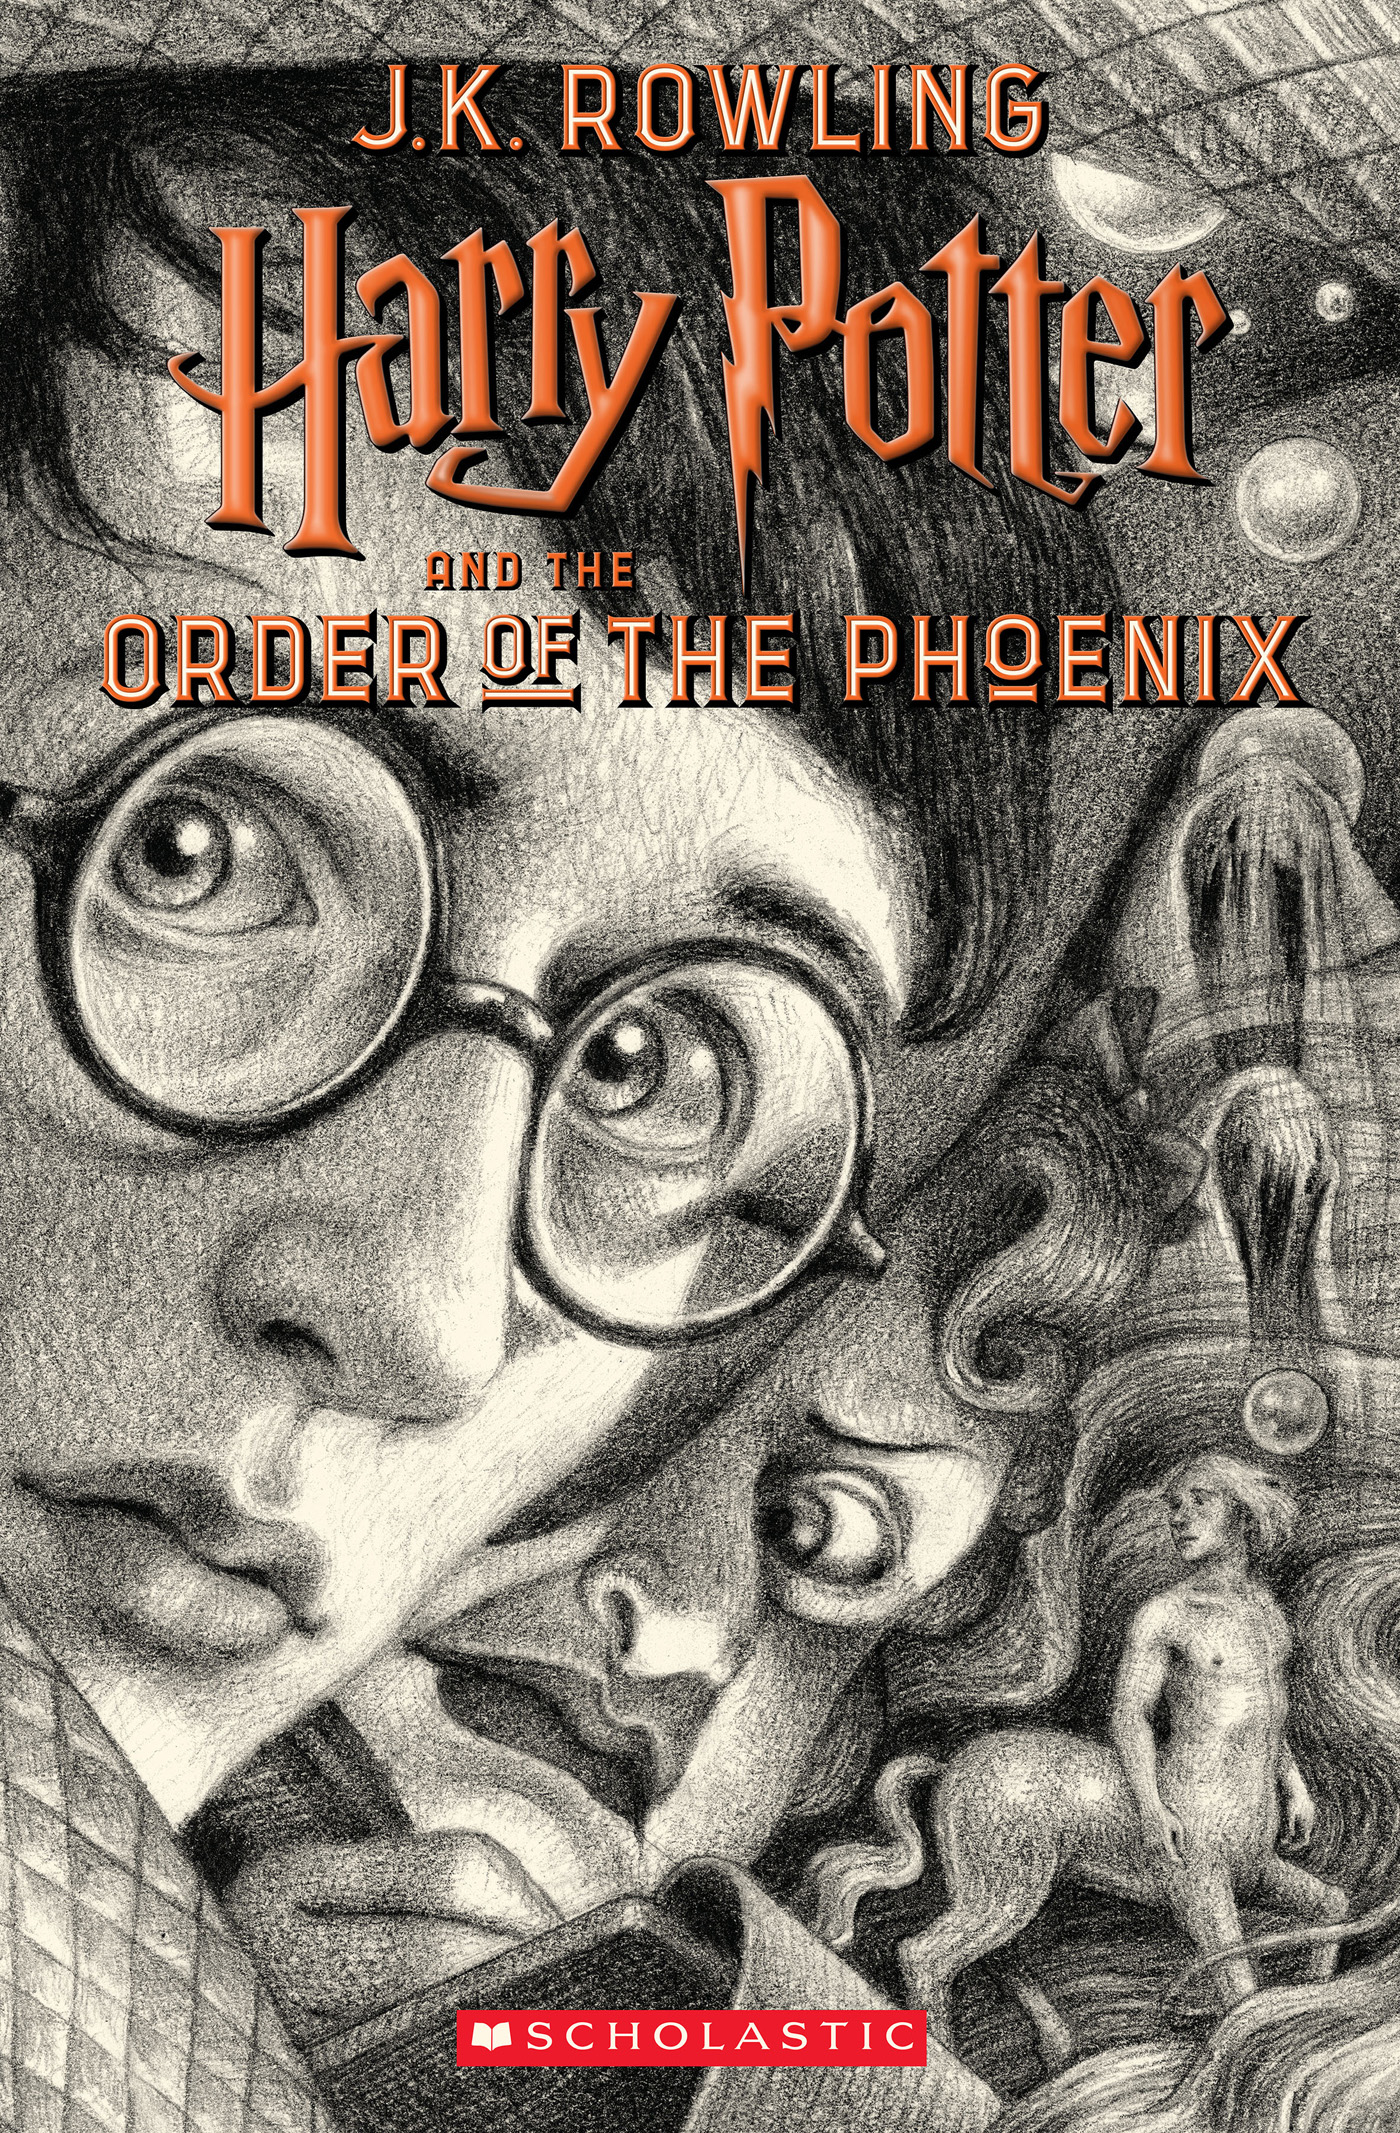 harry potter 5 book review